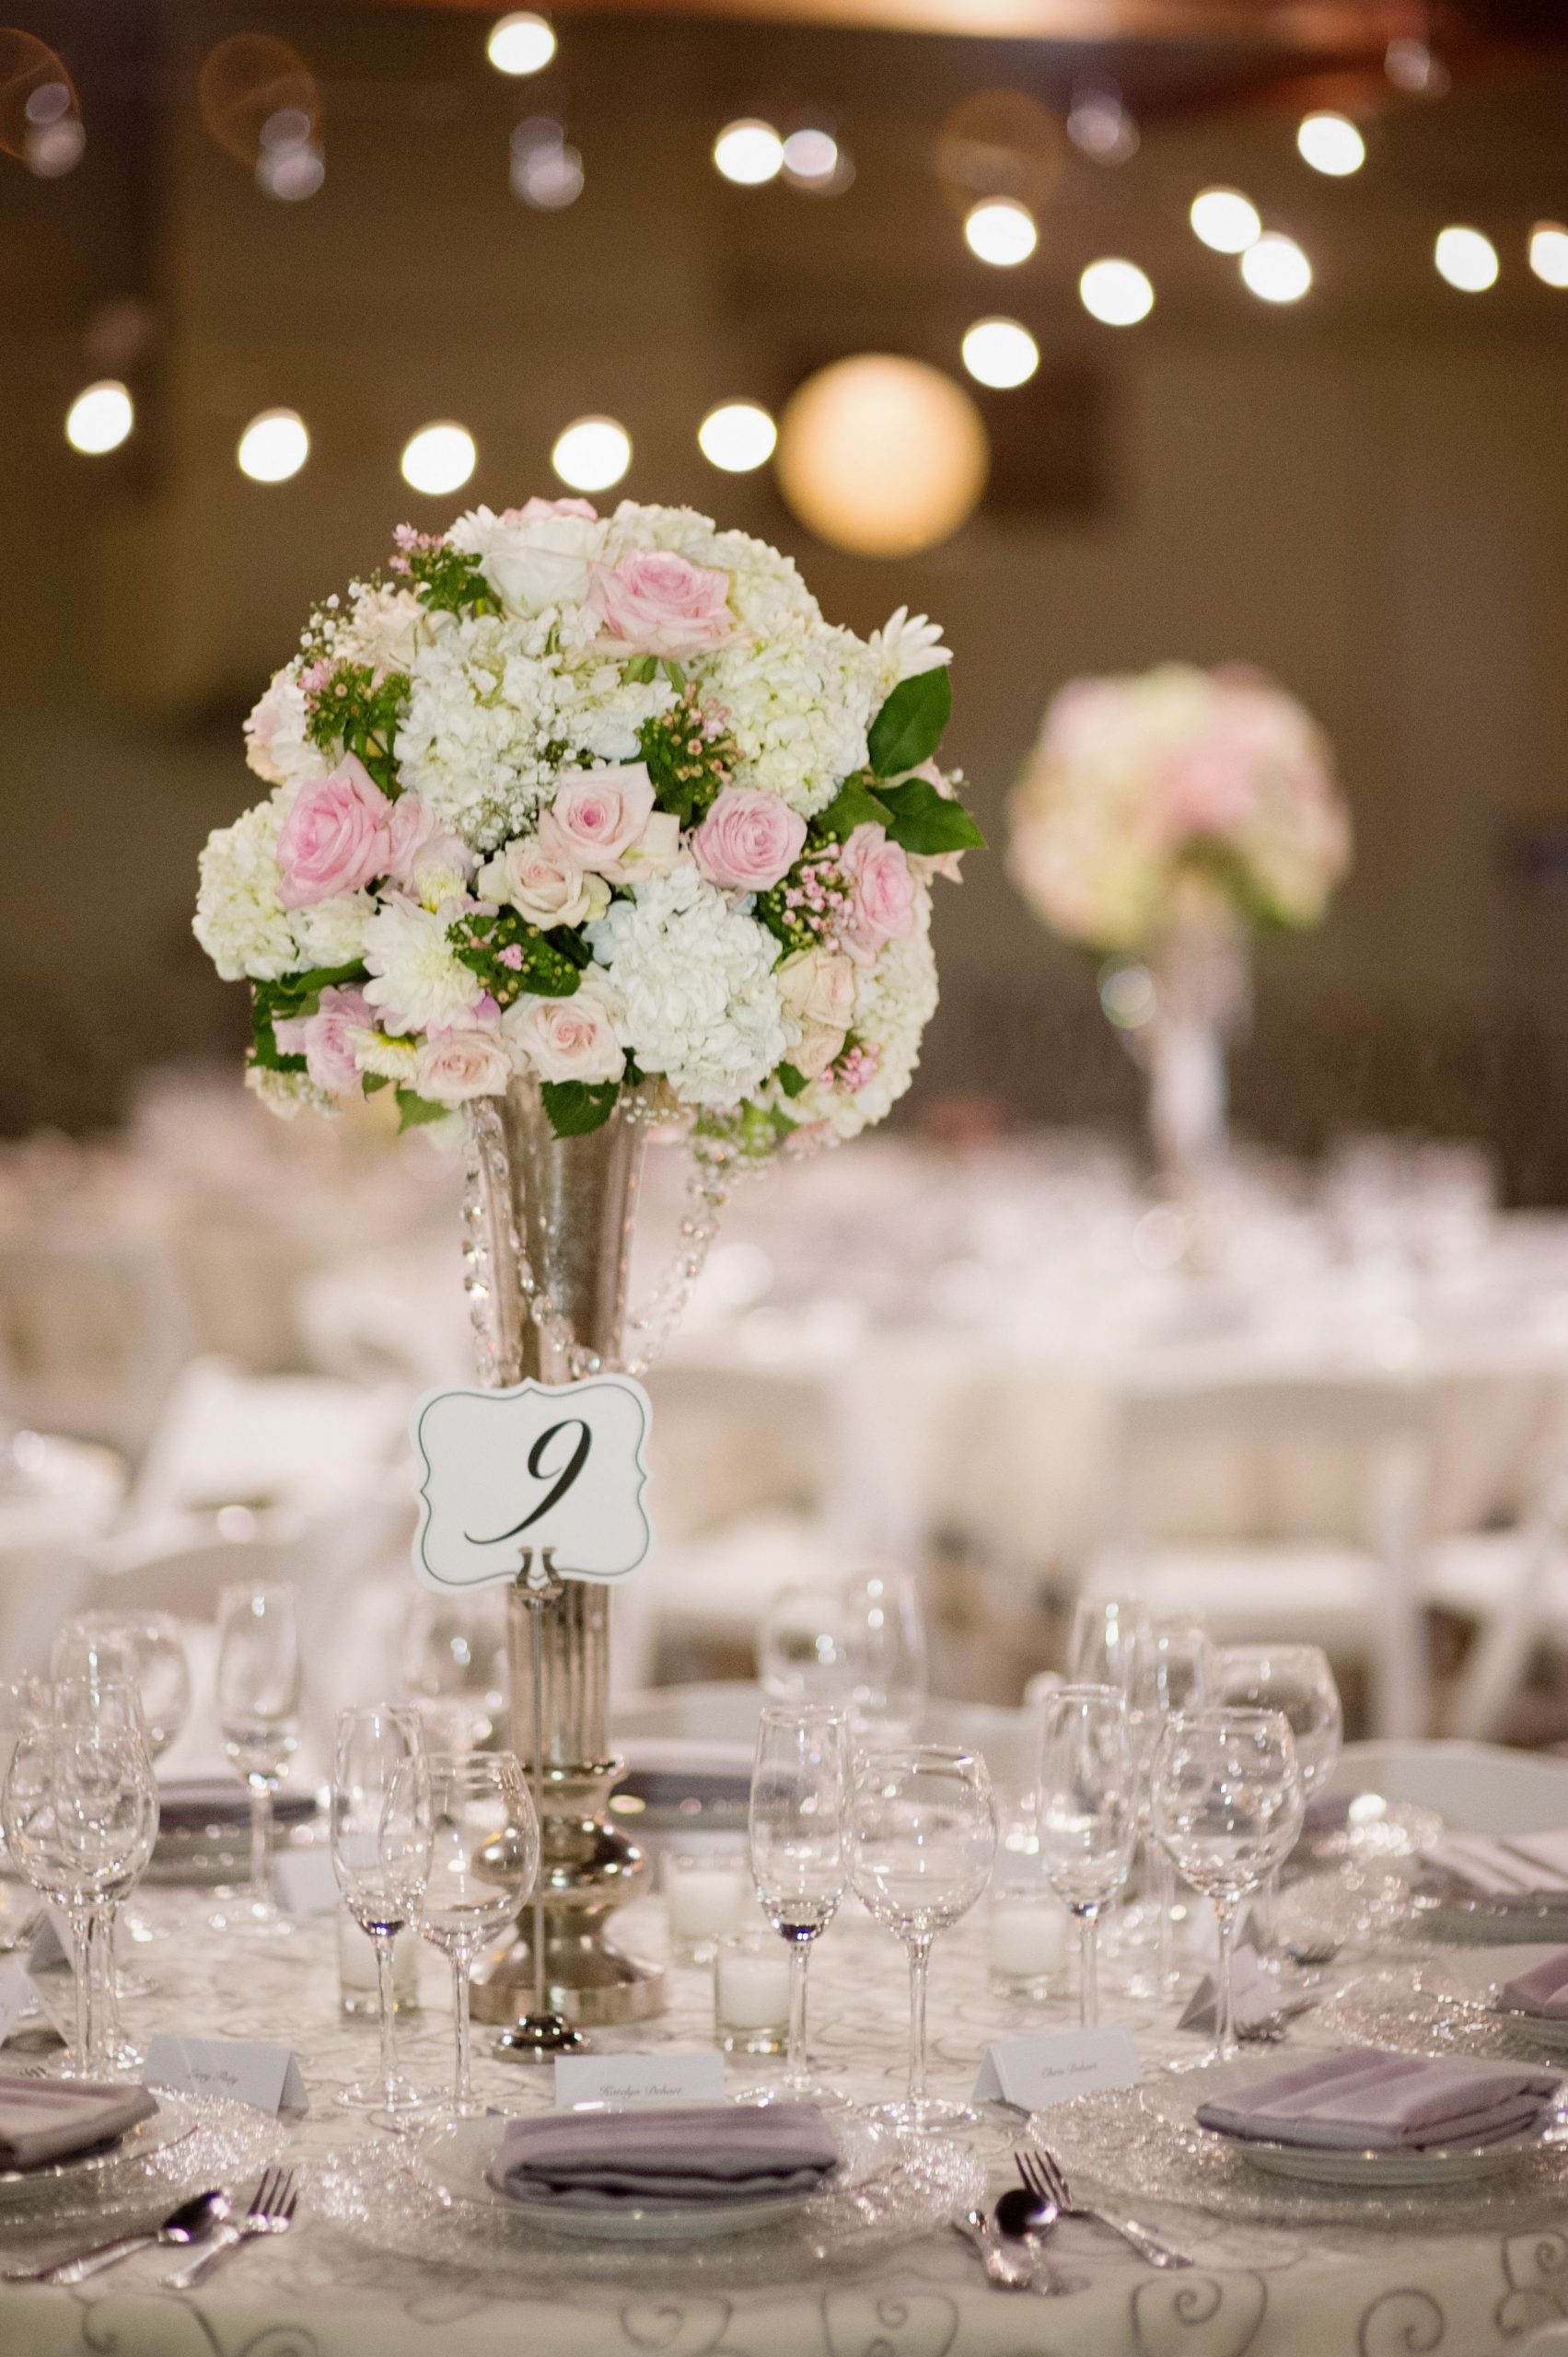 Wedding Centerpiece Using Tall Chic Silver Vase With Hanging throughout size 2633 X 3957